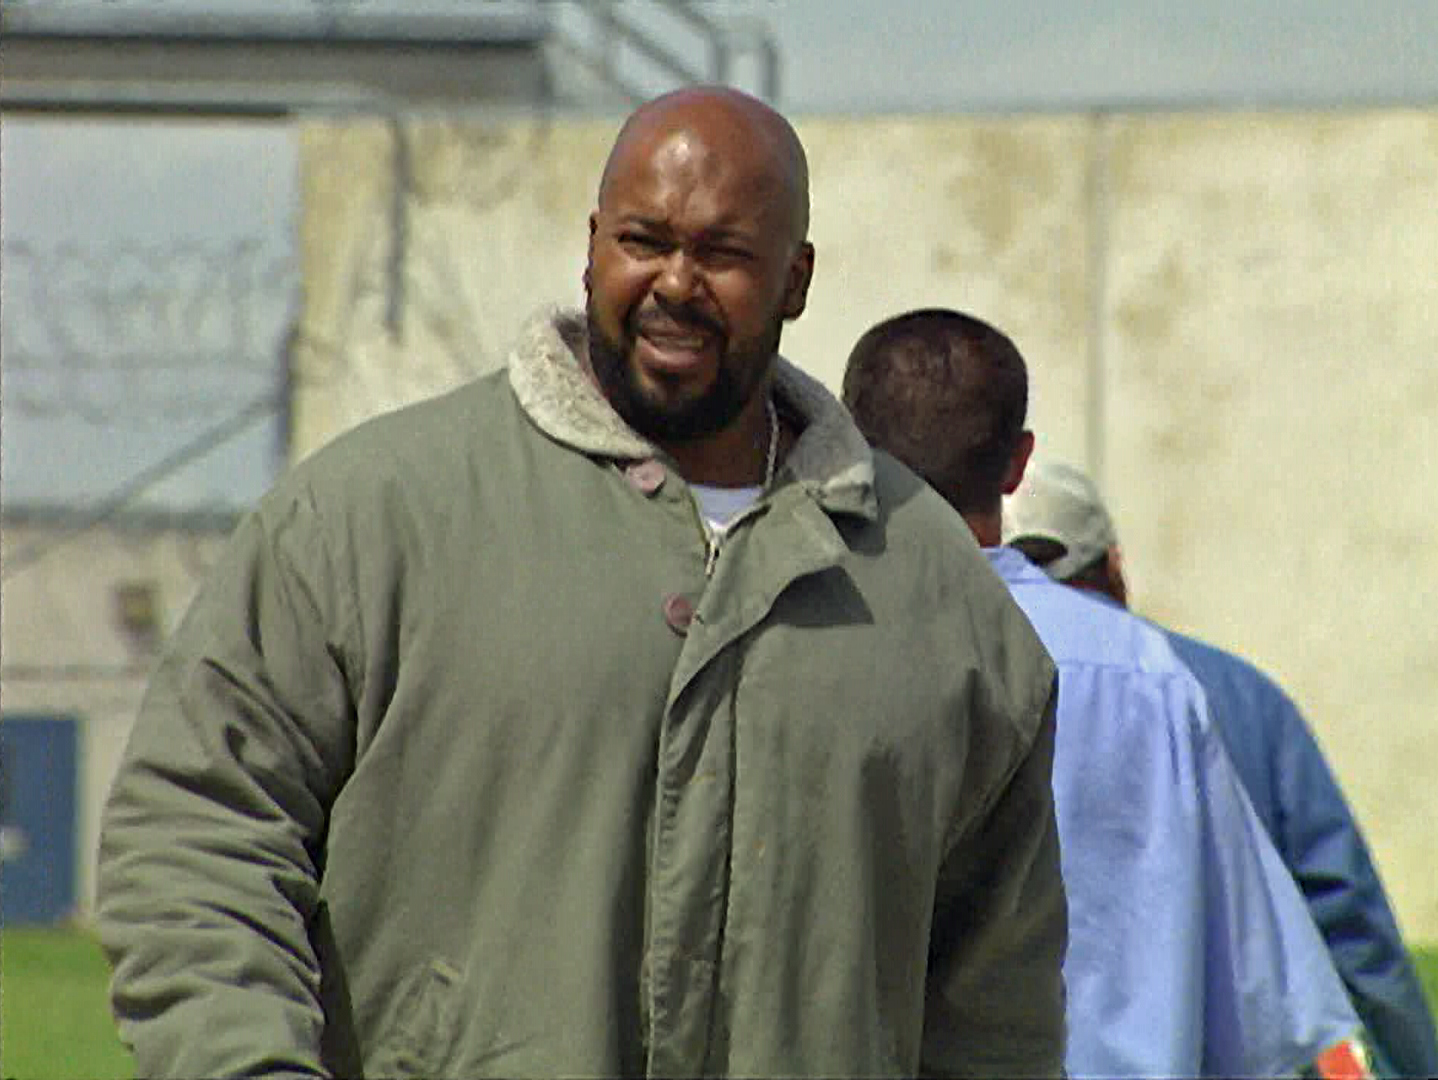 Exclusive Marion 'Suge' Knight's 2001 prison interview